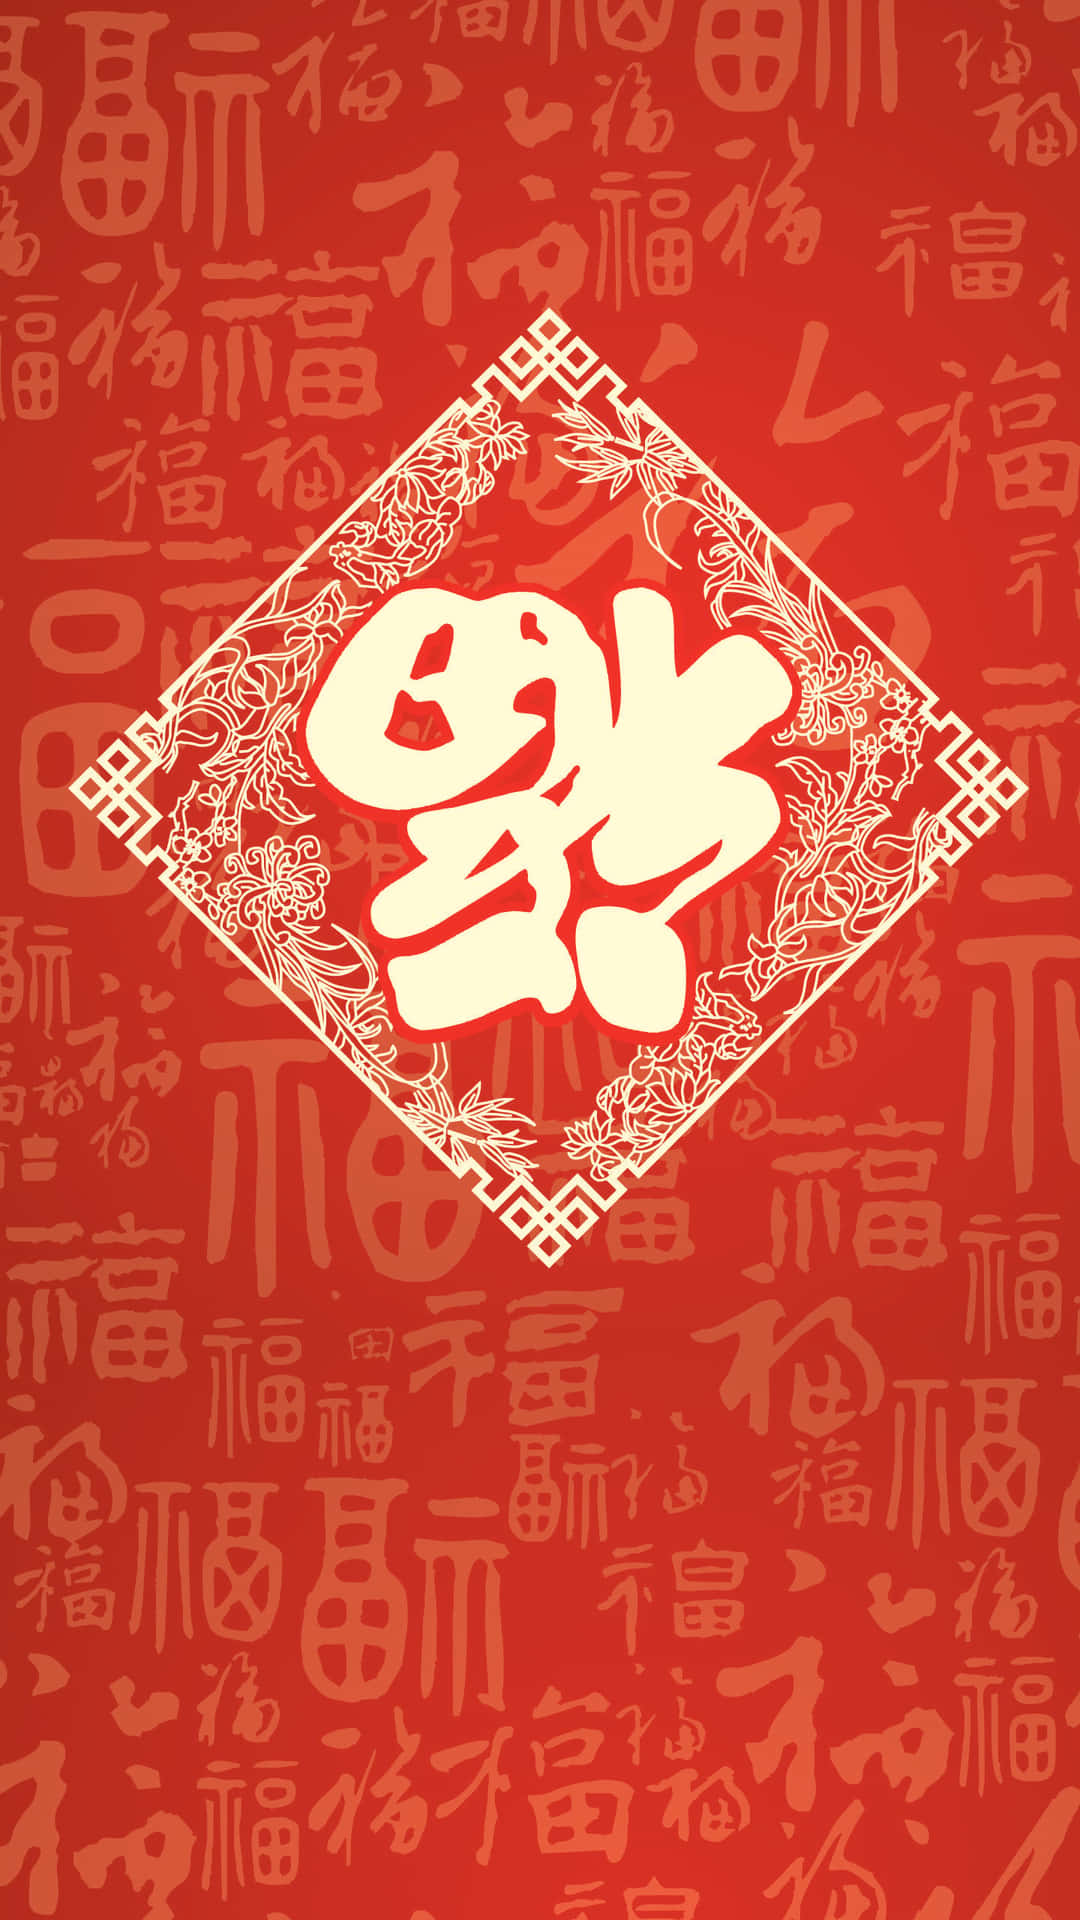 Apple's Chinese New Year wallpapers